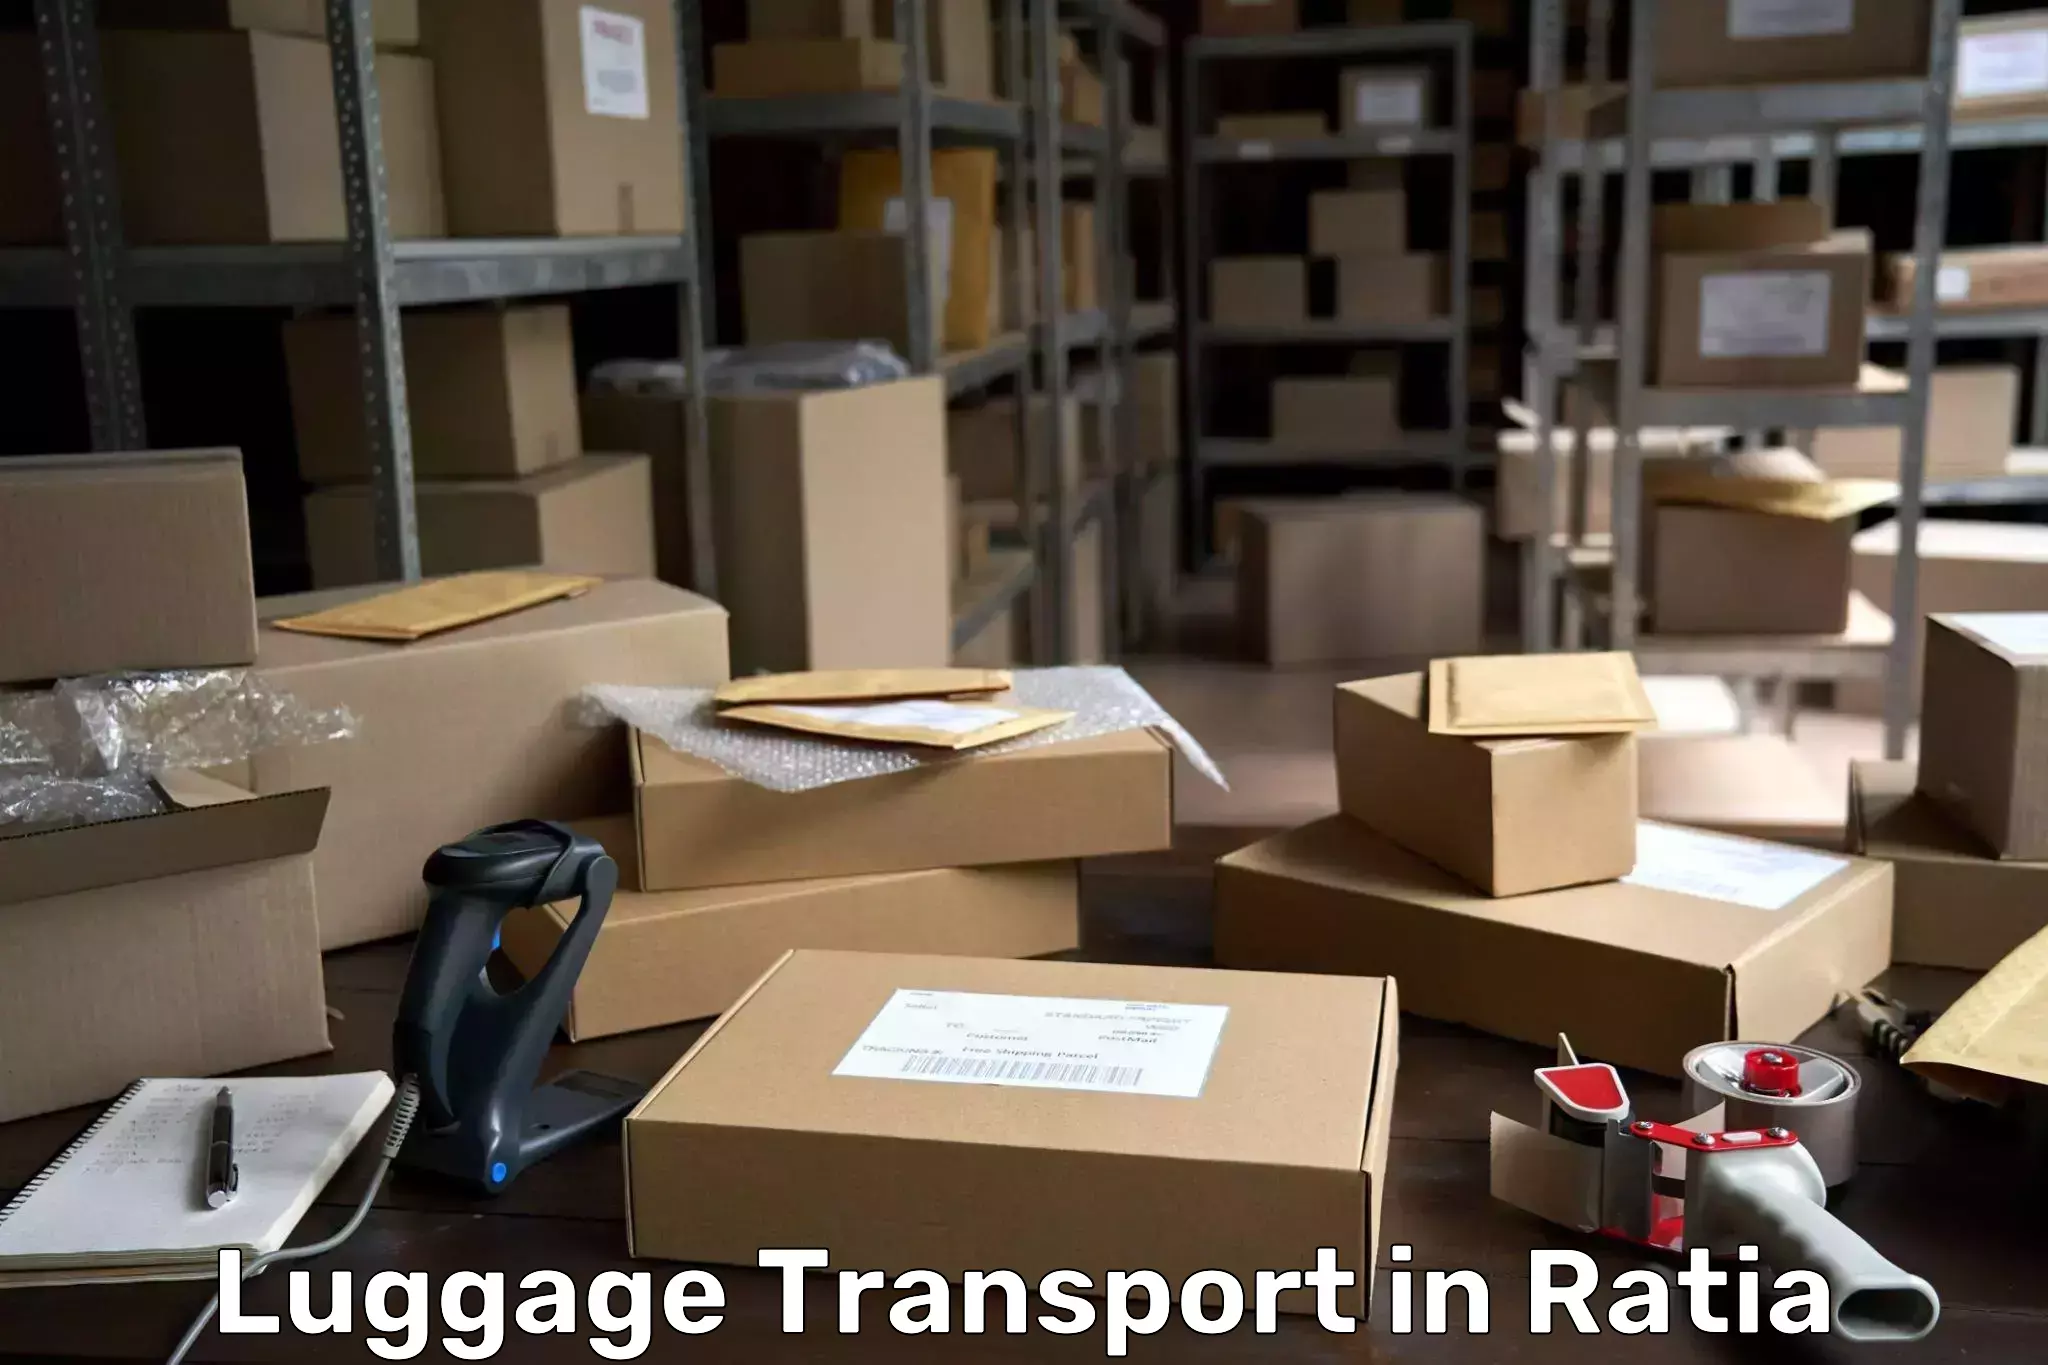 Luggage delivery logistics in Ratia